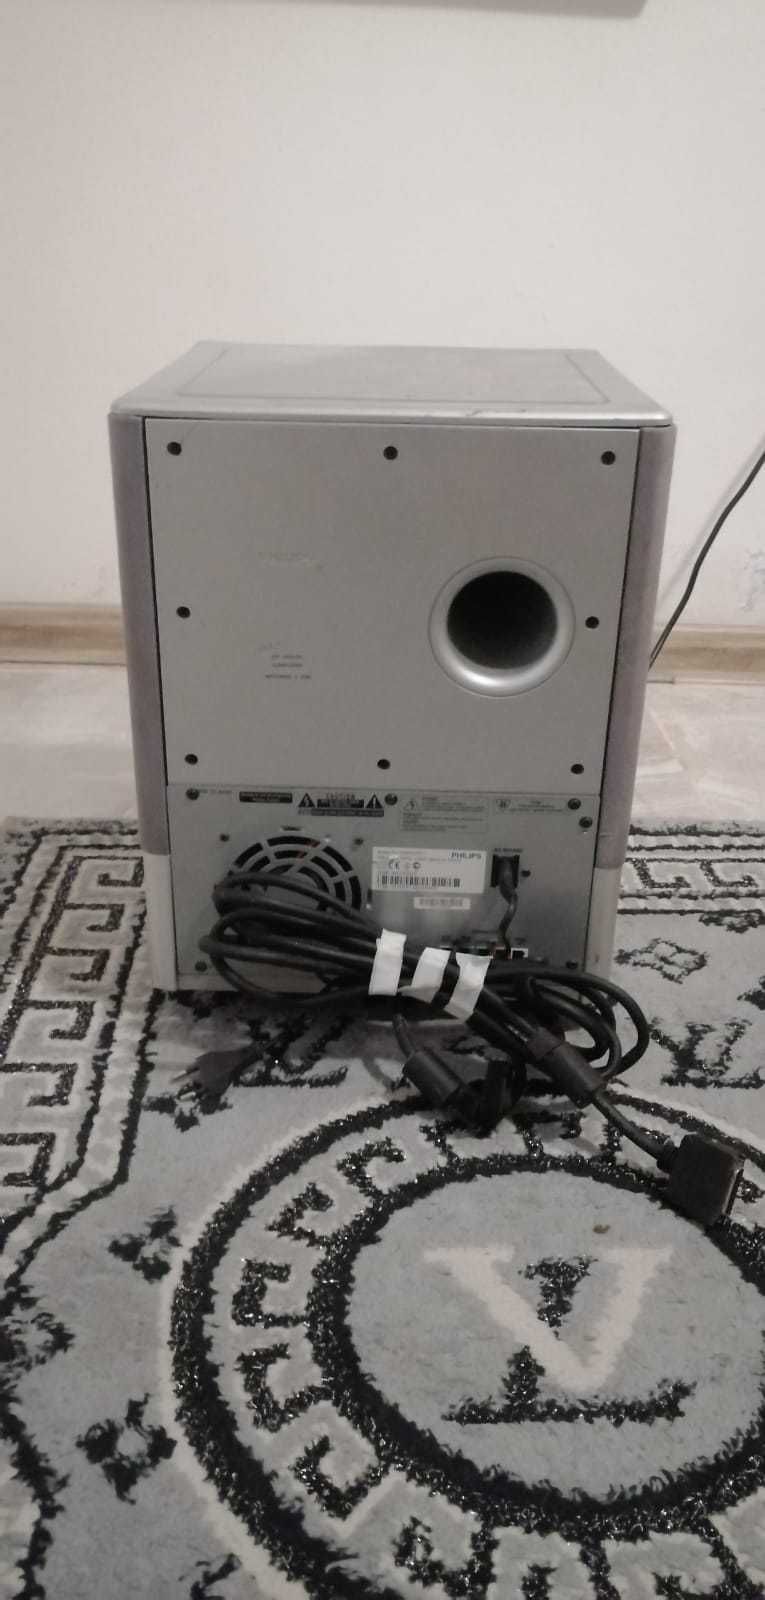 Philips subwoofer